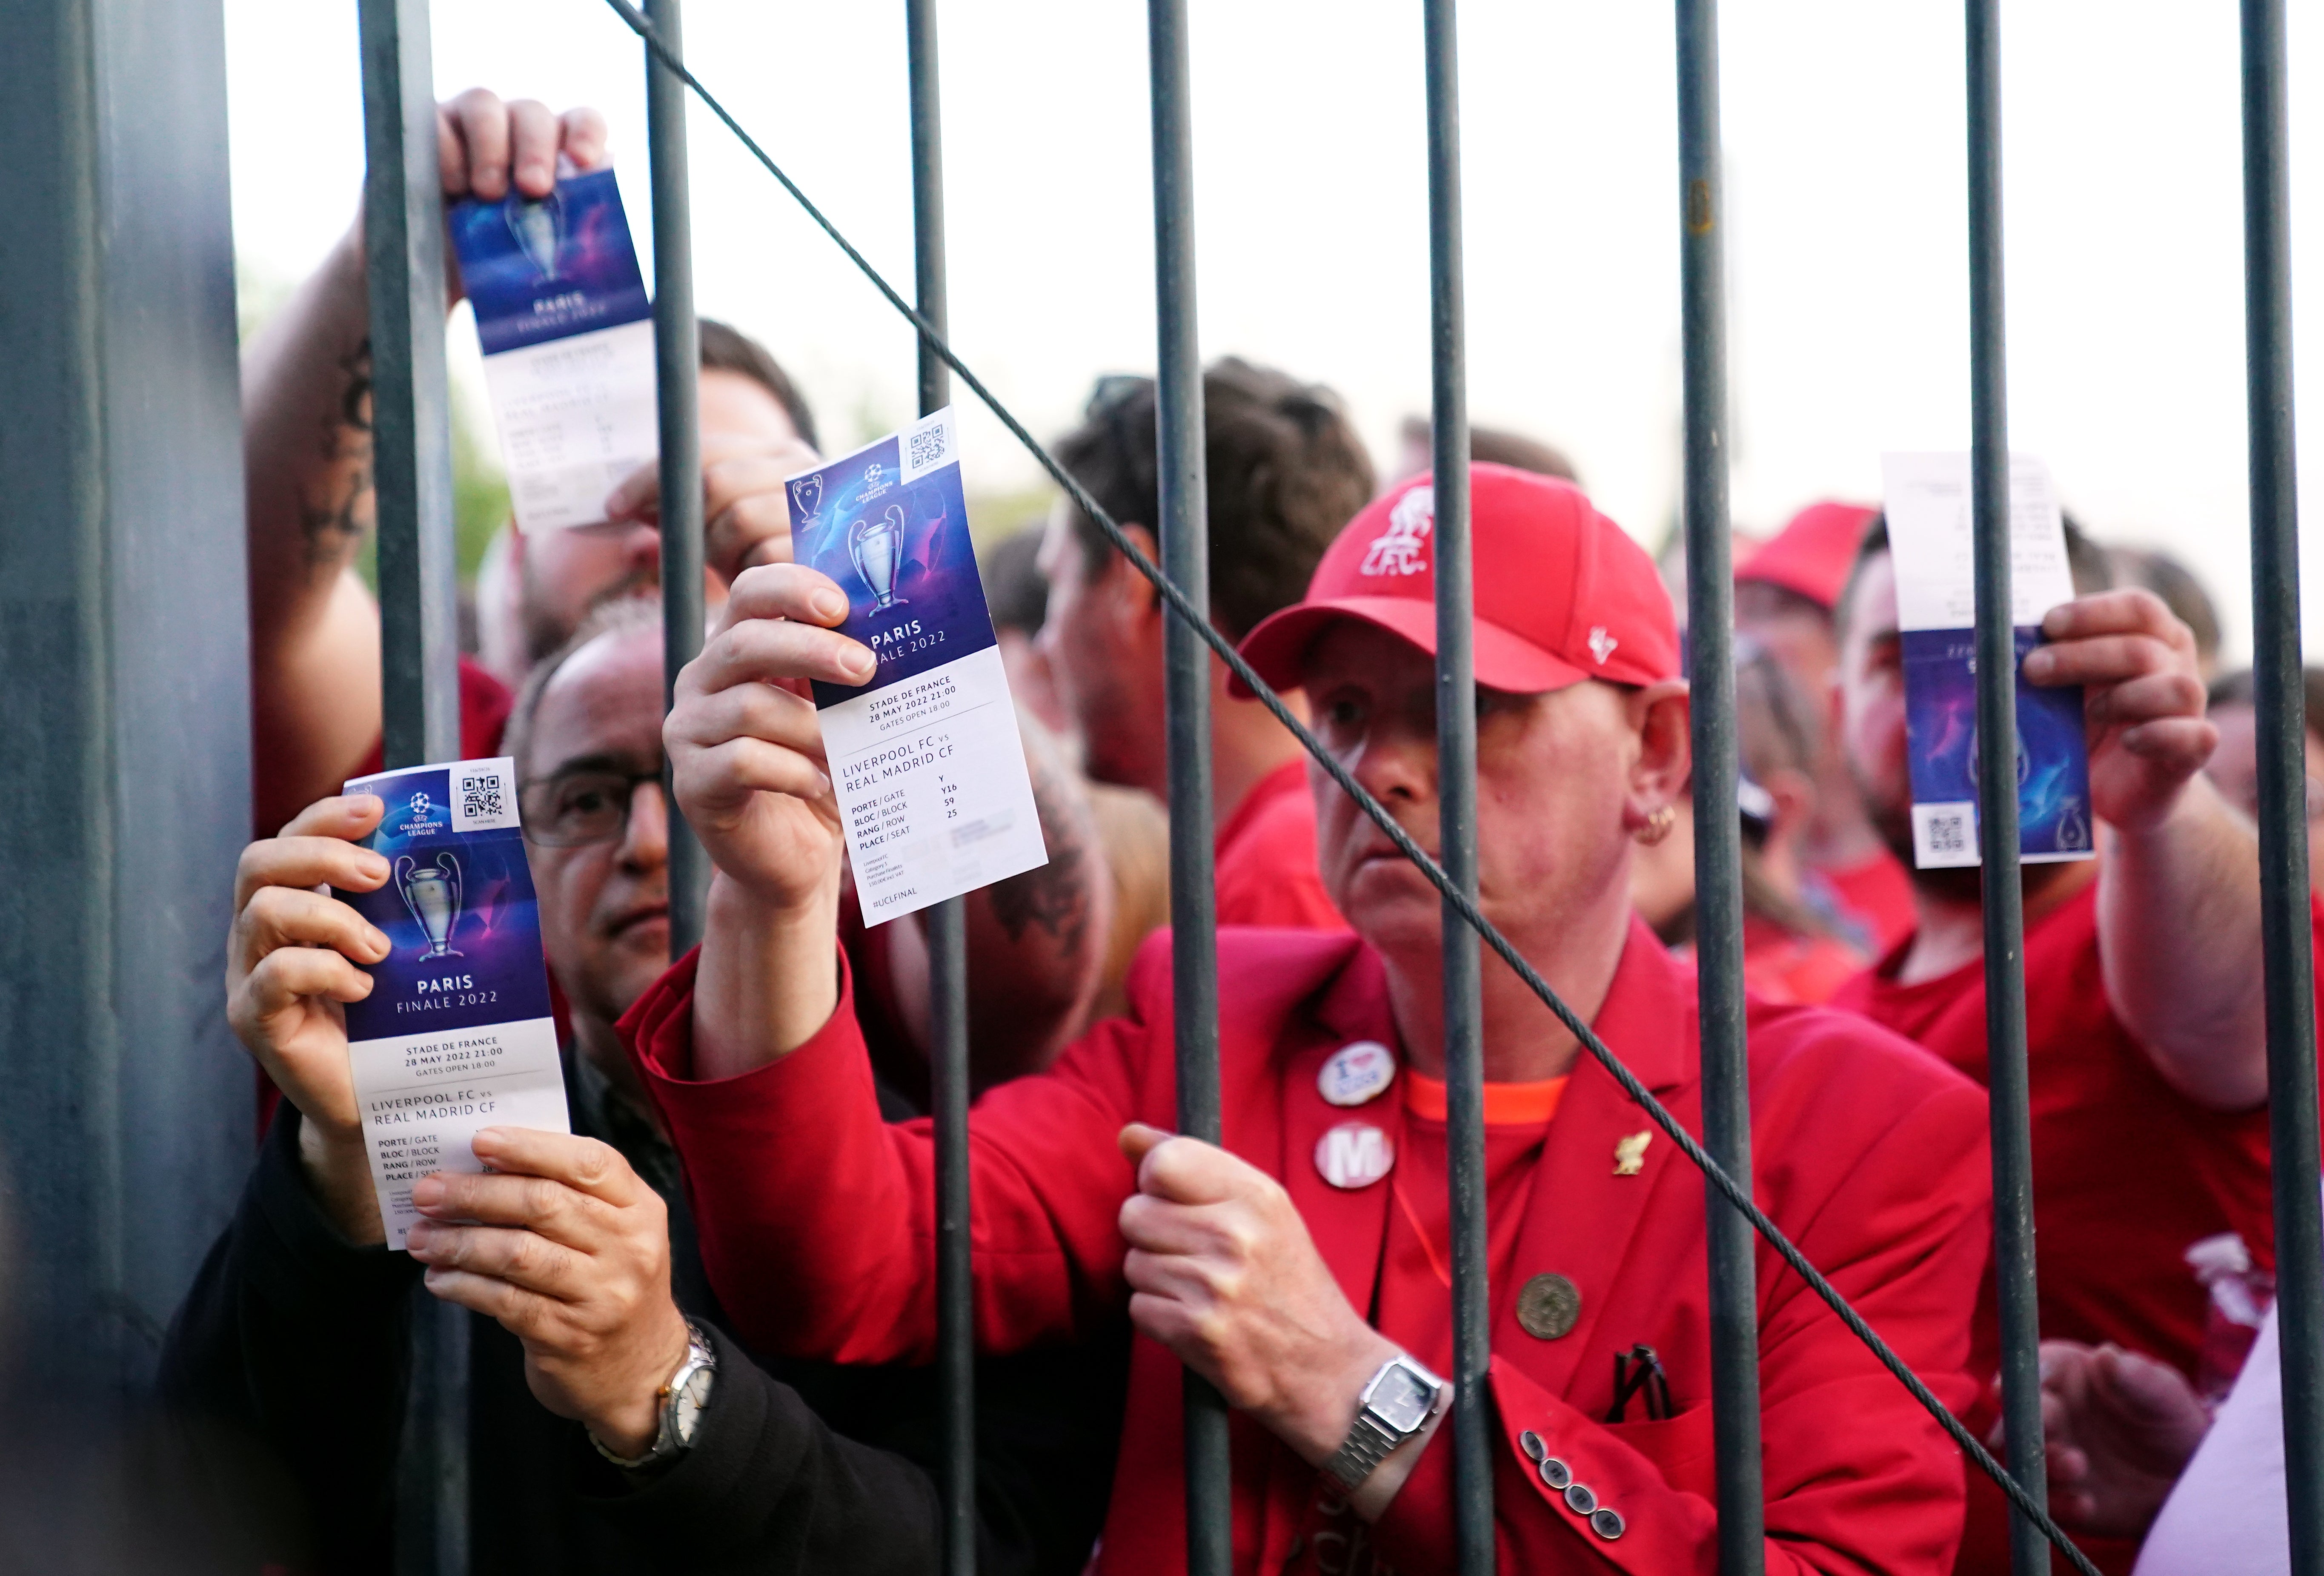 Liverpool supporters were unfairly blamed by the French authorities for the chaos surrounding last season’s Champions League final in Paris, a Senate report has concluded (Adam Davy/PA)